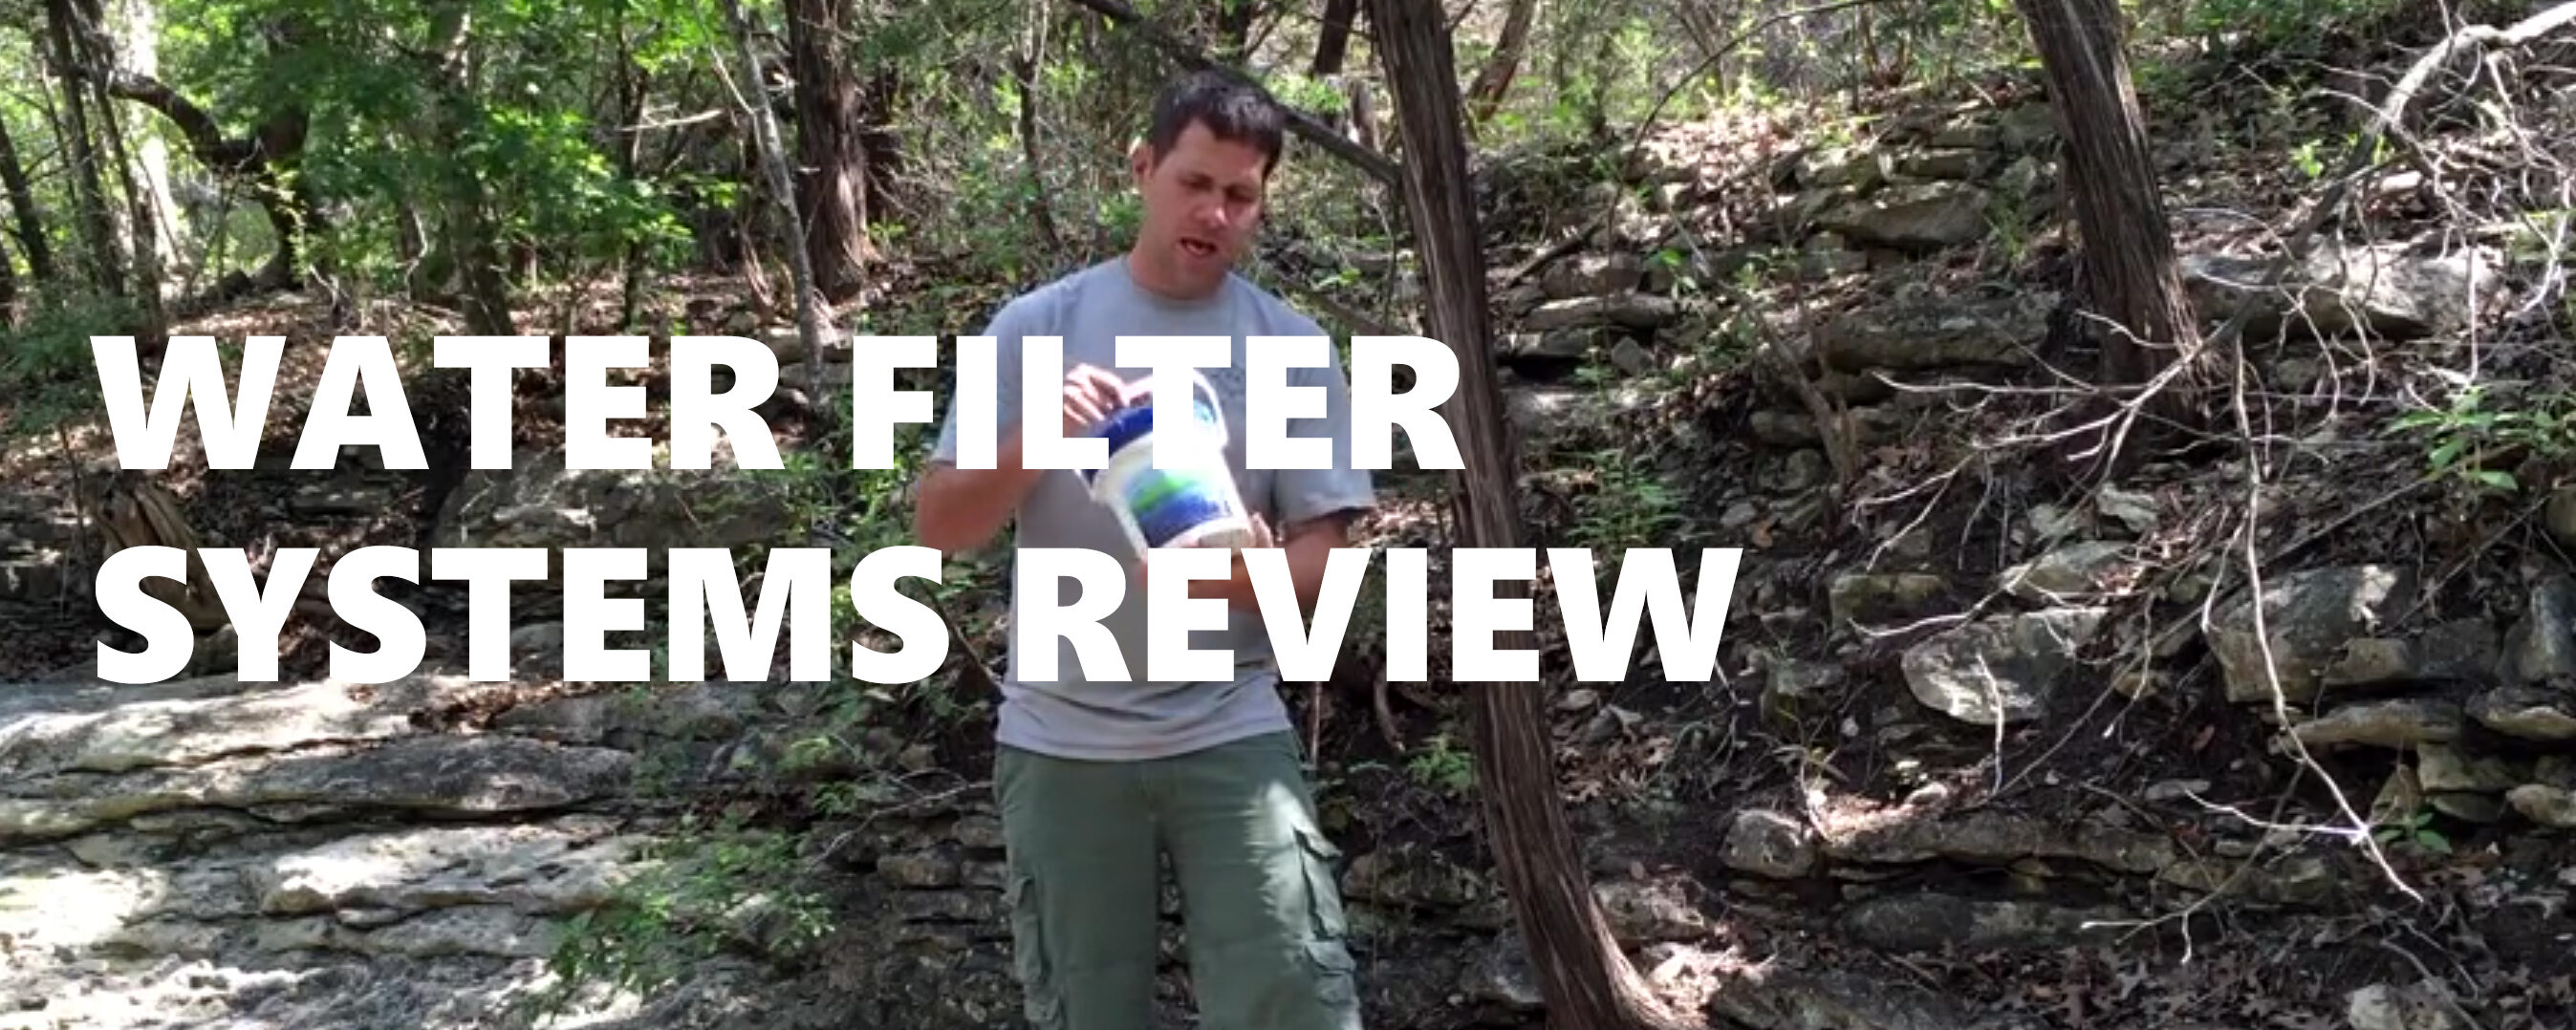 WATER FILTER SYSTEMS REVIEW